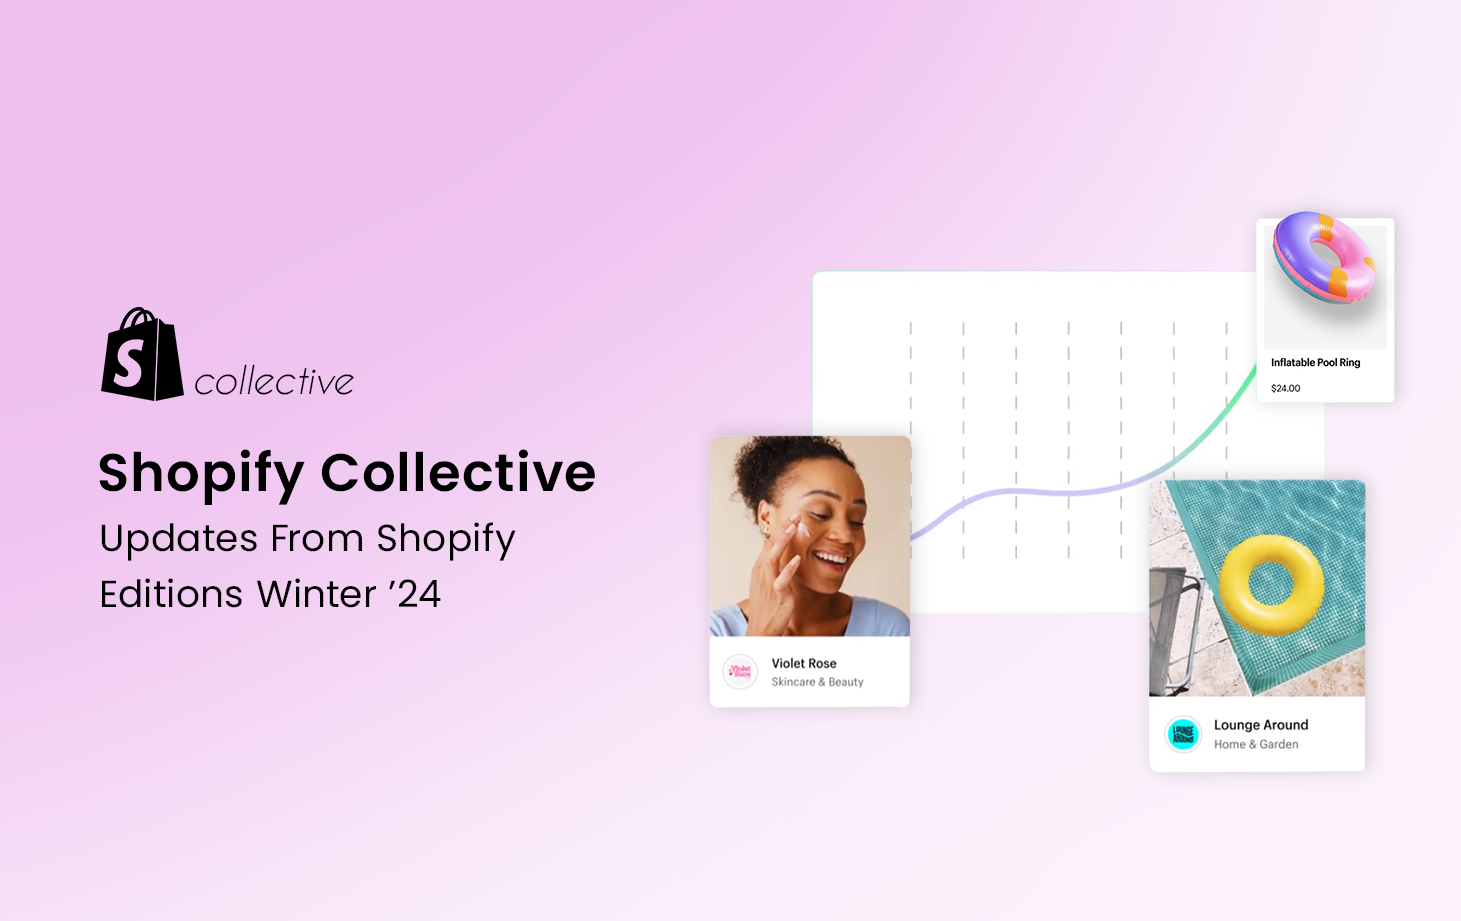 Shopify Collective: Updates From Shopify Editions Winter '24